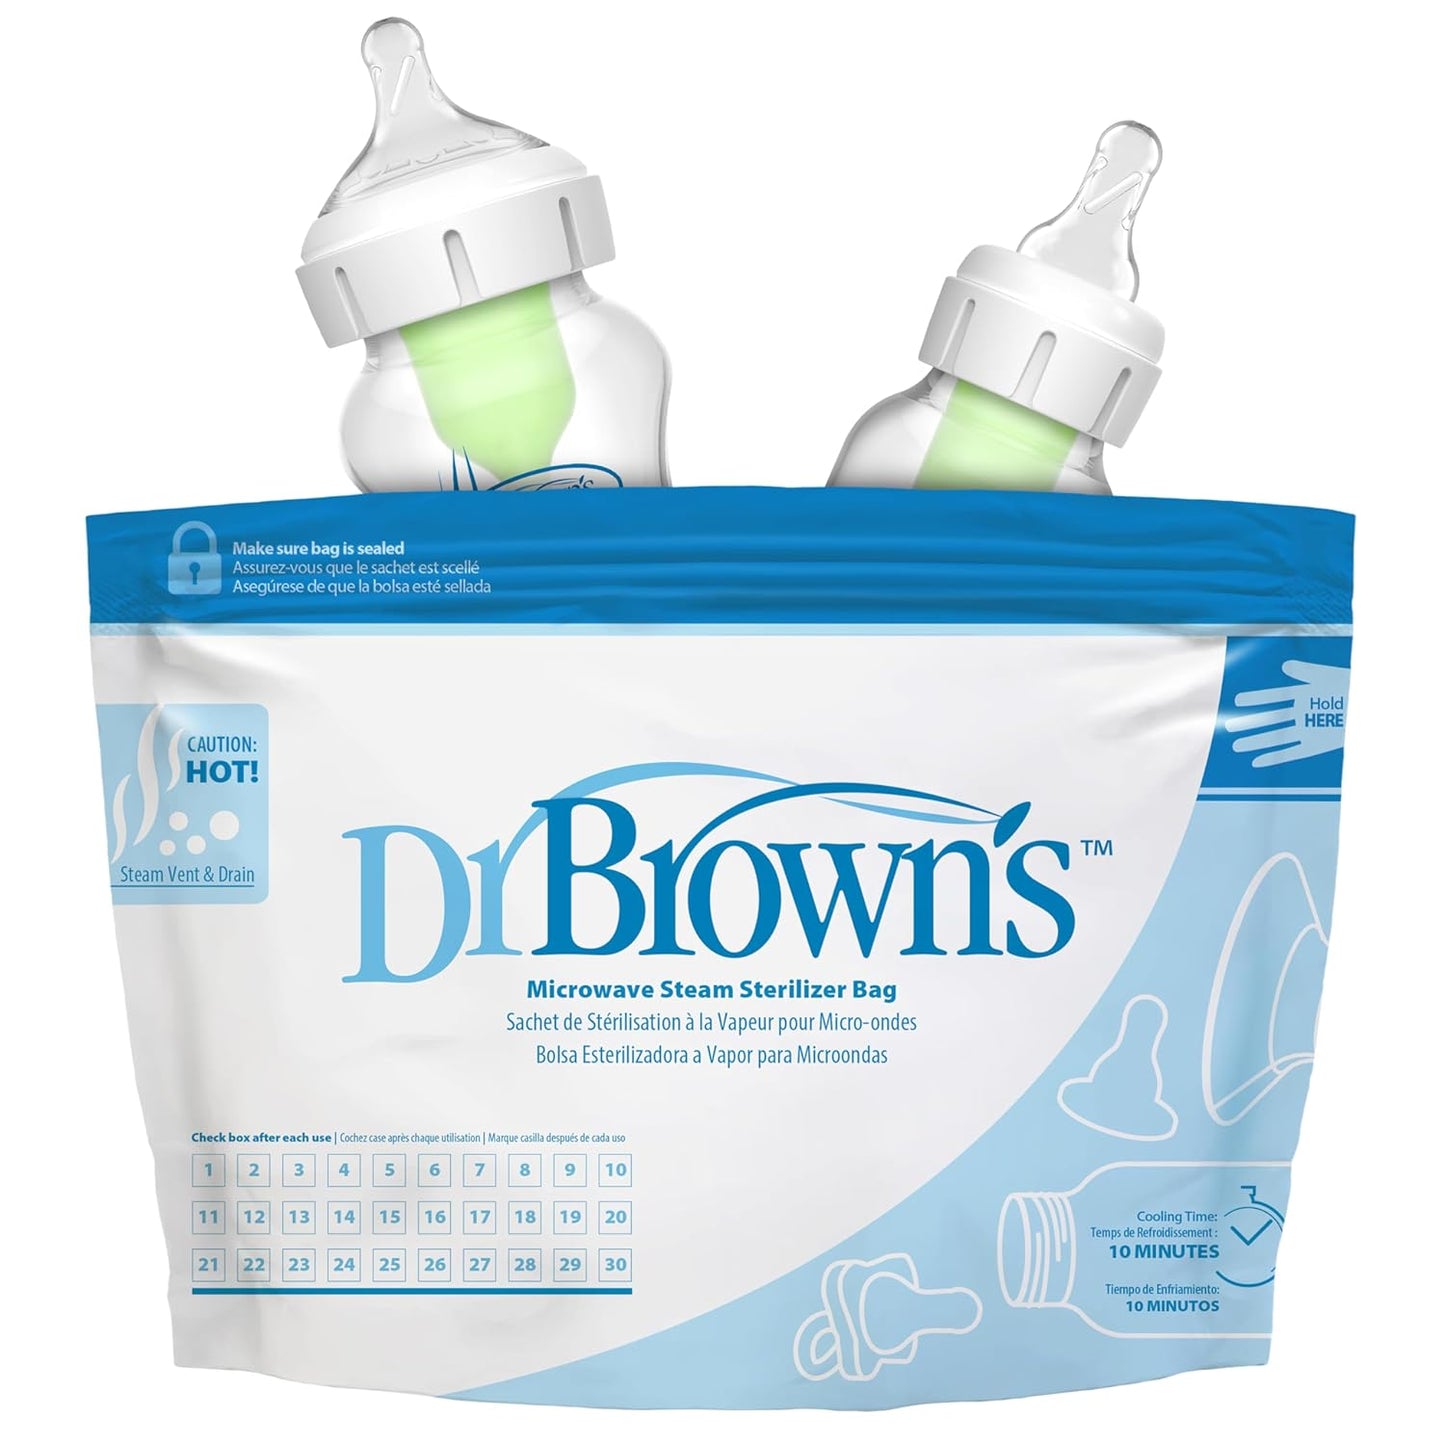 Dr. Brown's Microwave Steam Sterilizer Bags for Baby Bottles, Pacifiers, Pump Parts and Accessories, Travel Baby Bottle Sterilizer, 30 Uses per Bag, 5-Pack